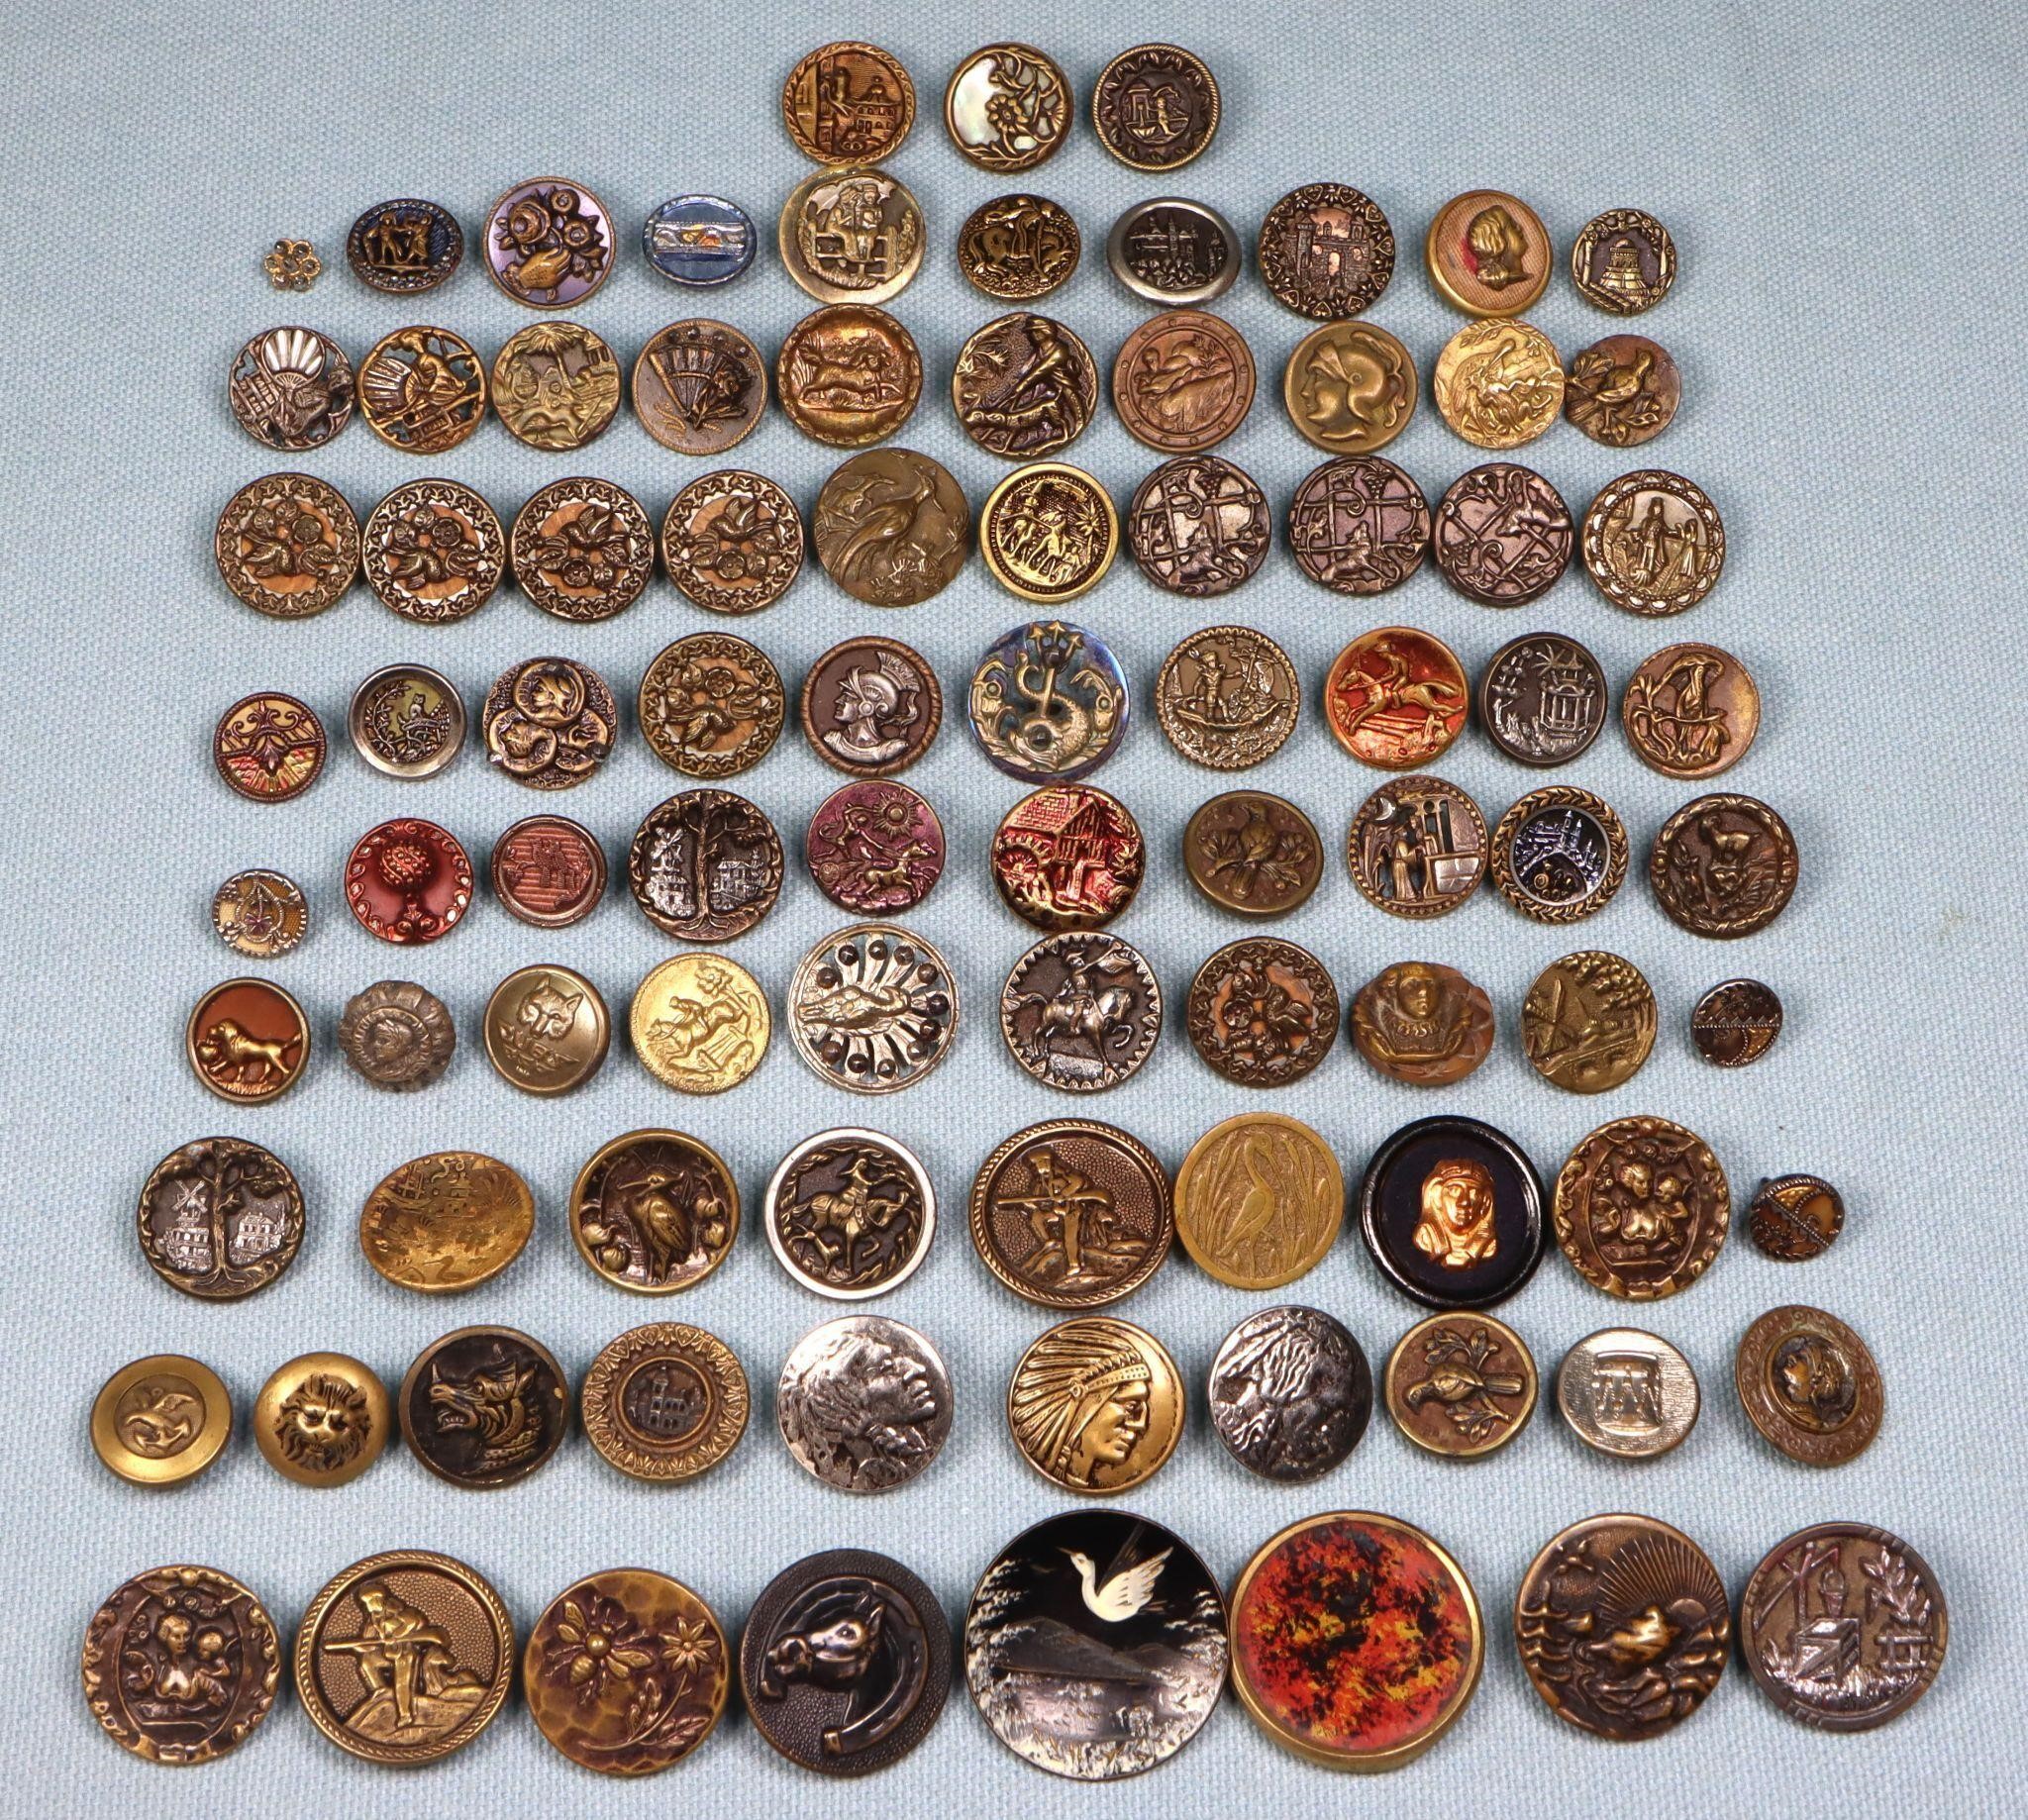 (90) Assorted Victorian Picture Buttons